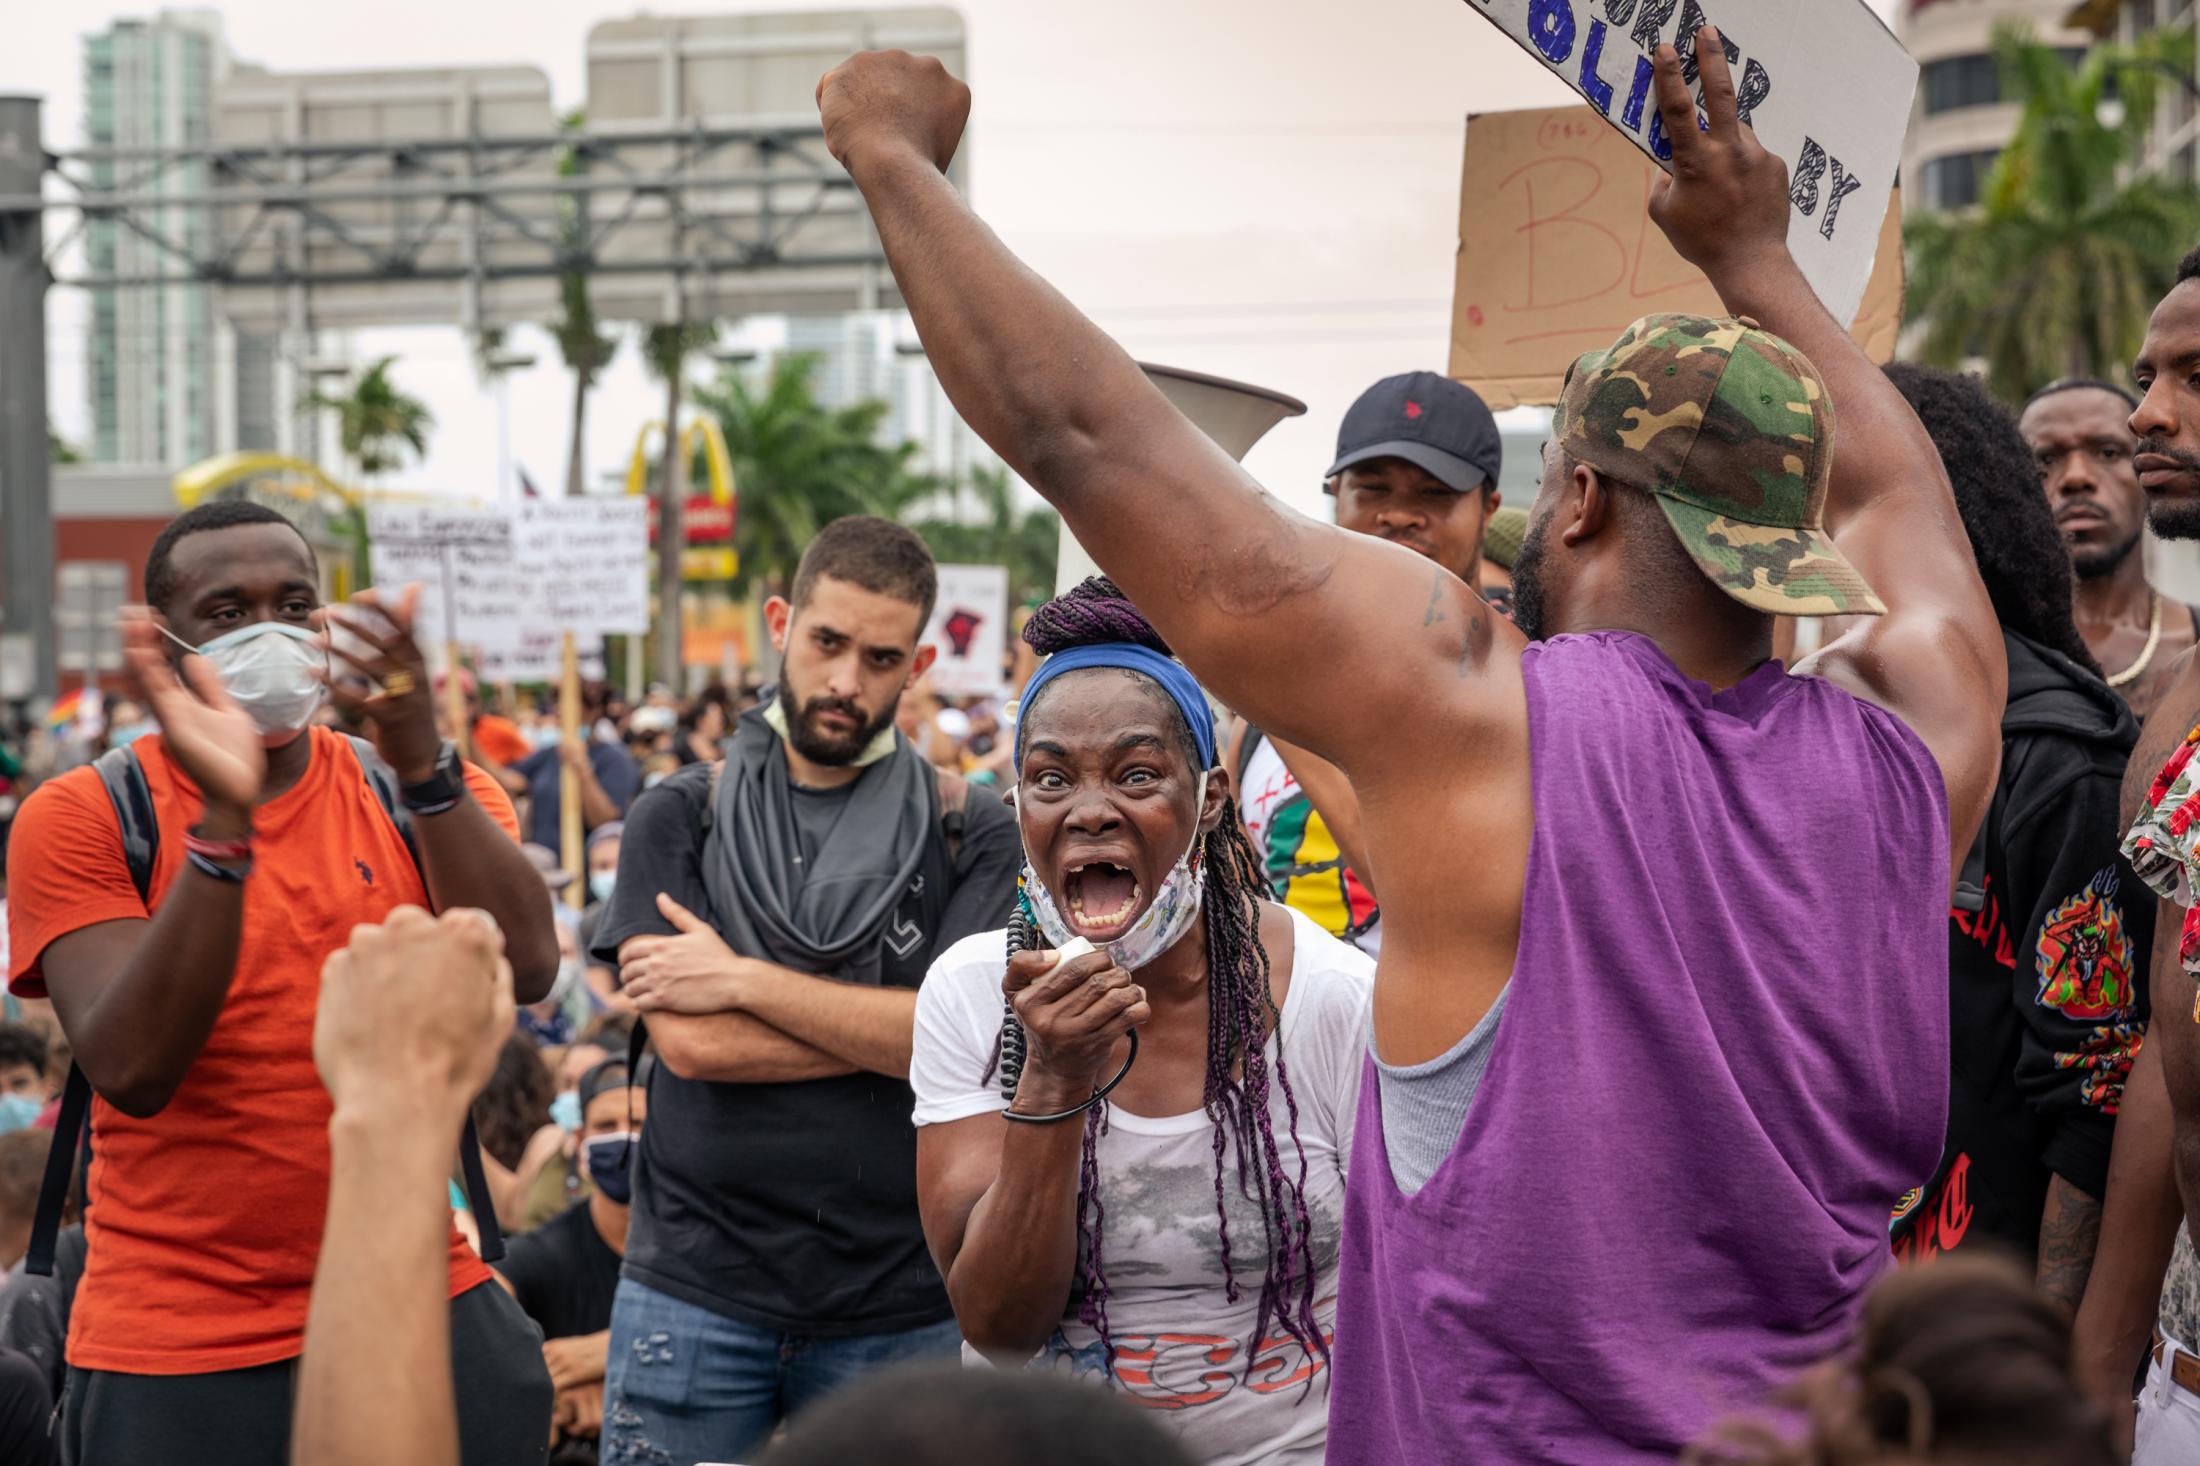 Miami, Black Lives Matter Protests - BLM Protest on Biscayne Blvd, Miami, Florida June 6, 2020 A woman tells the story of how she was...